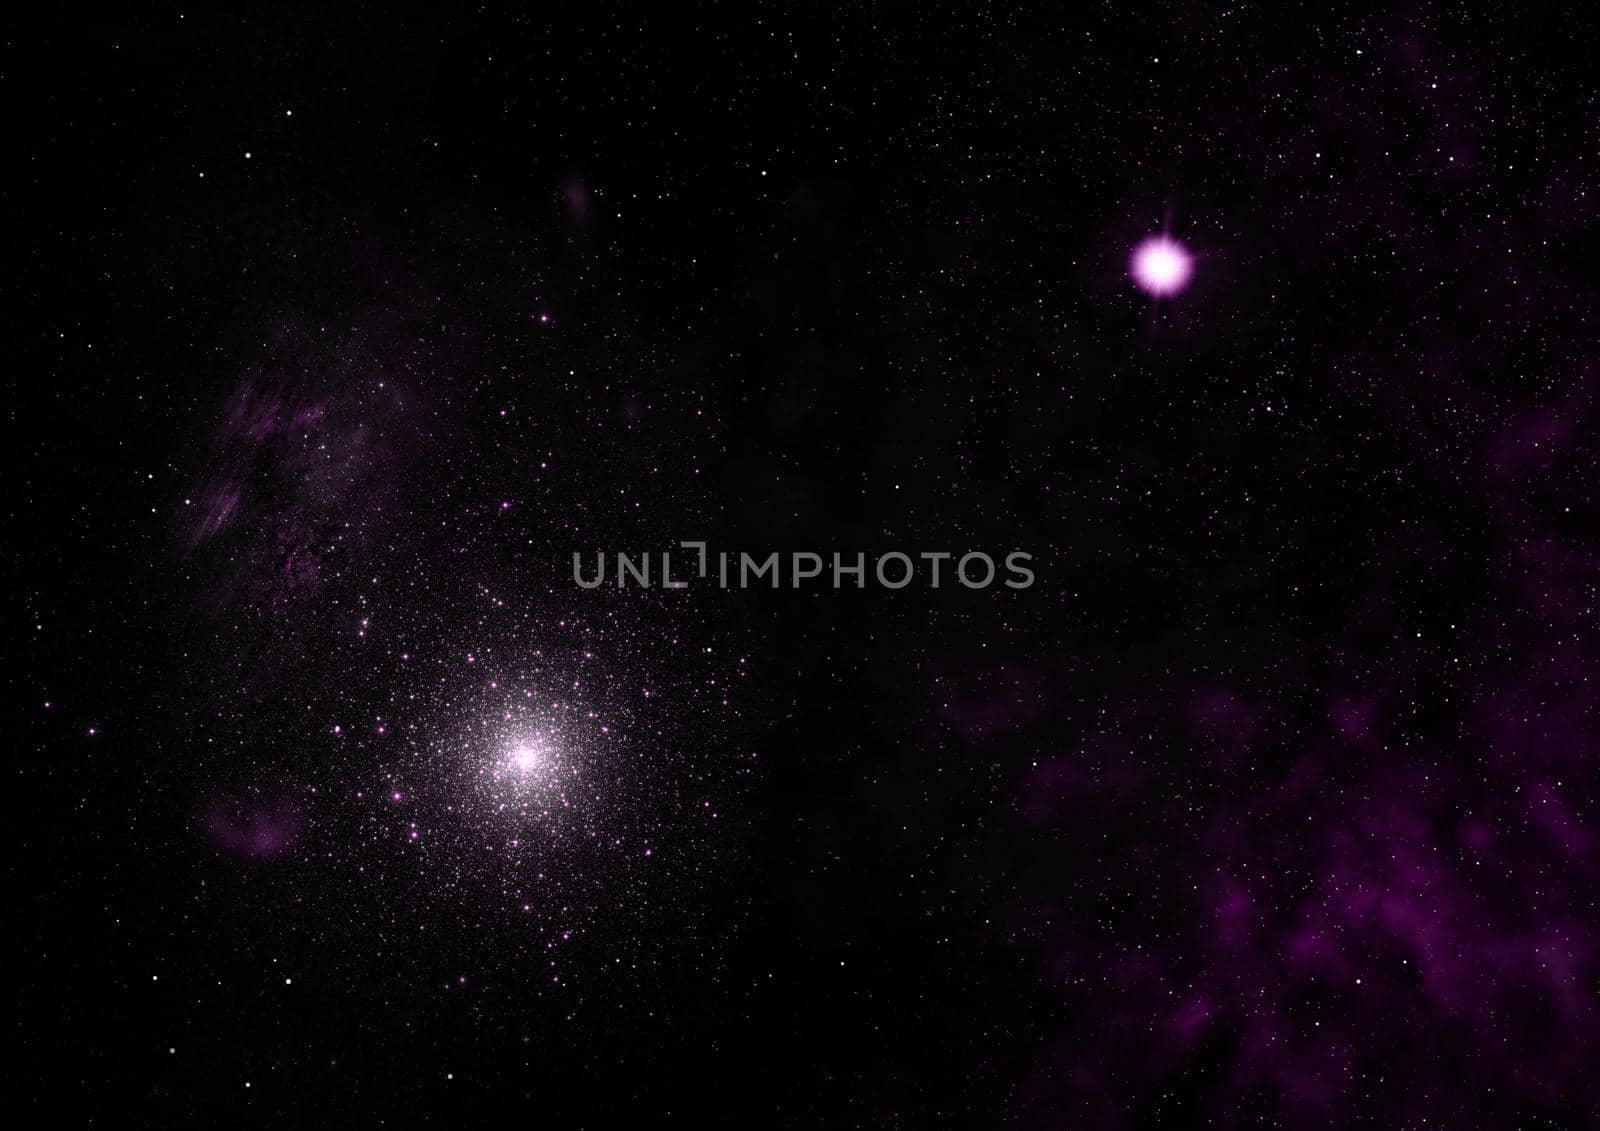 Star field in space a nebulae and a gas congestion. Elements of this image furnished by NASA . 3D rendering